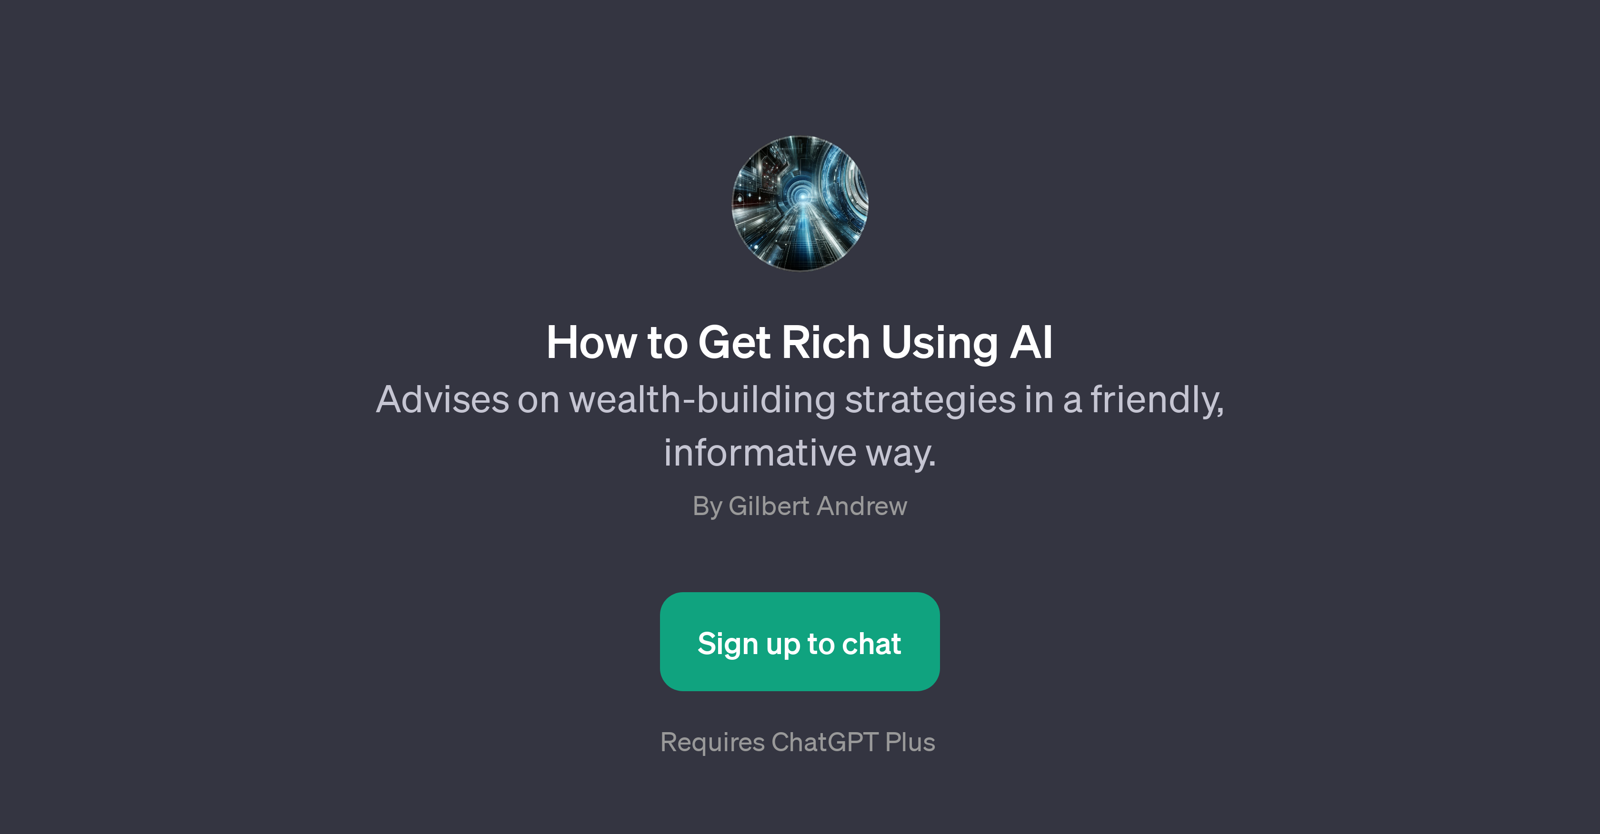 How to Get Rich Using AI website